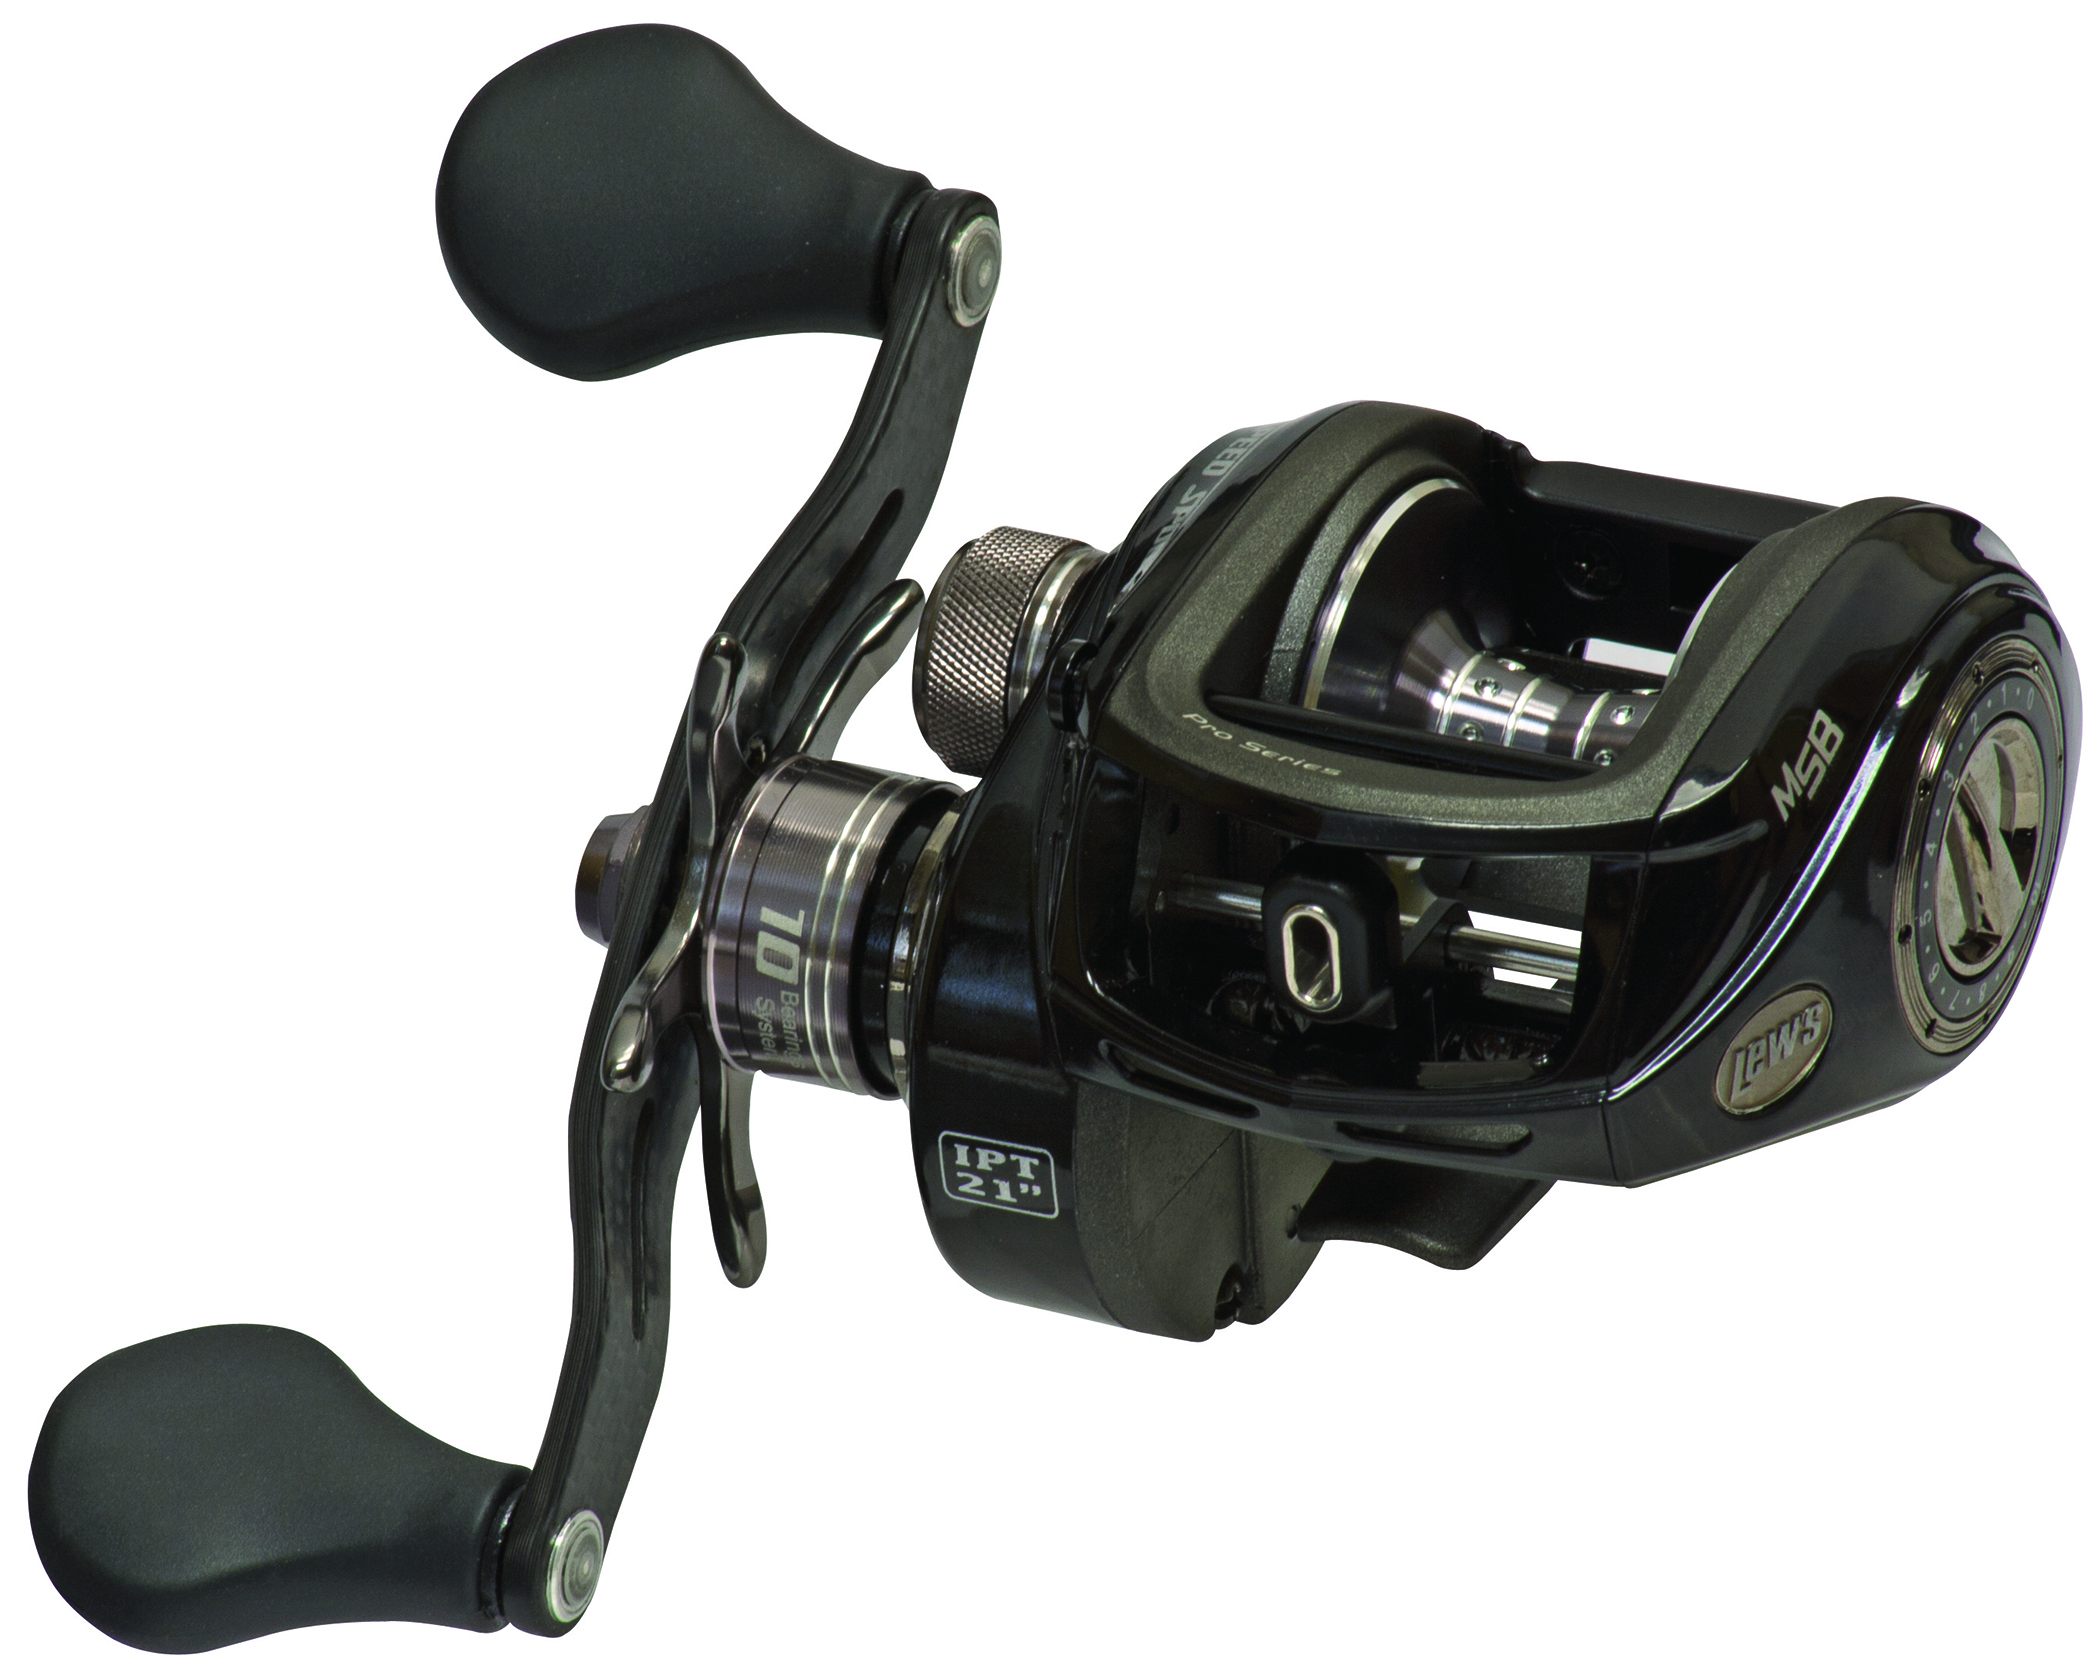 The BB1 Pro, featuring the latest in baitcast reel technologies, is among the contest prizes at Lew's Bassmaster Classic booth.